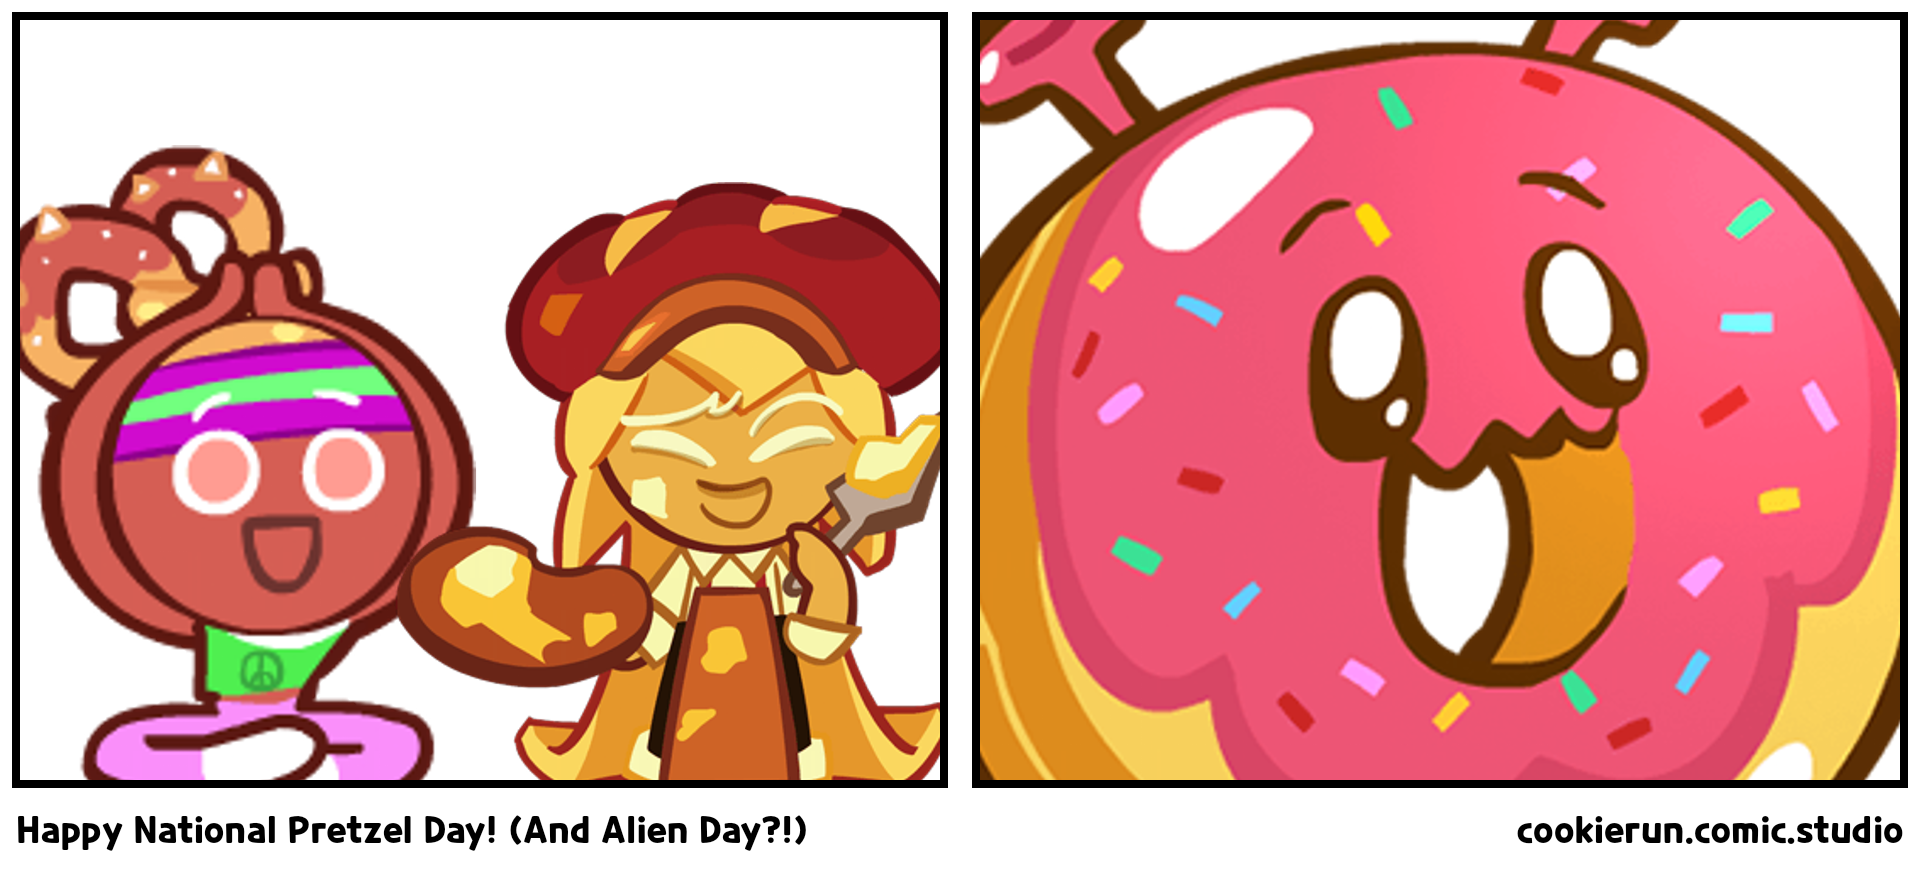 Happy National Pretzel Day! (And Alien Day?!)